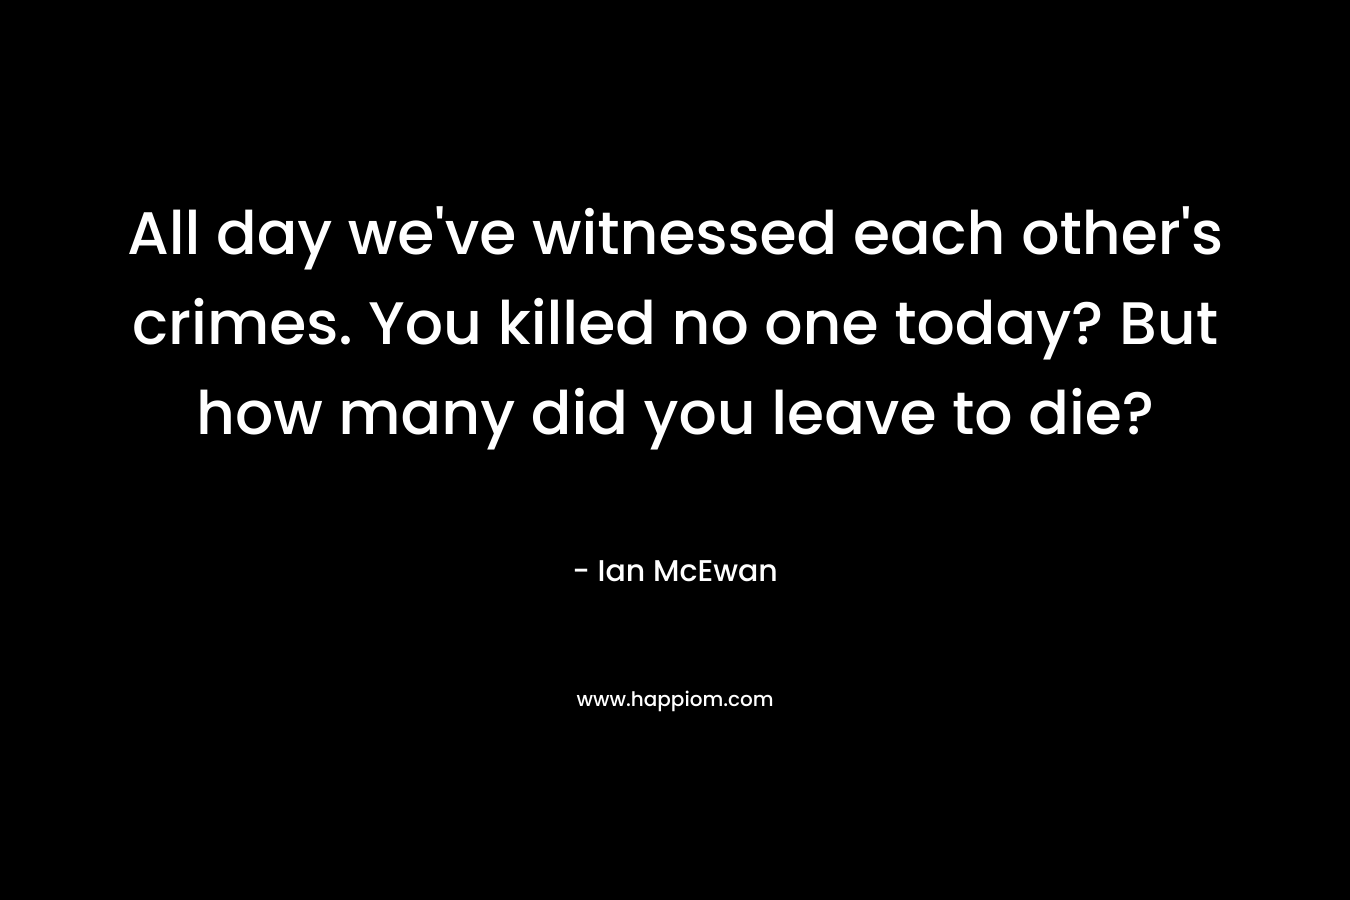 All day we’ve witnessed each other’s crimes. You killed no one today? But how many did you leave to die? – Ian McEwan